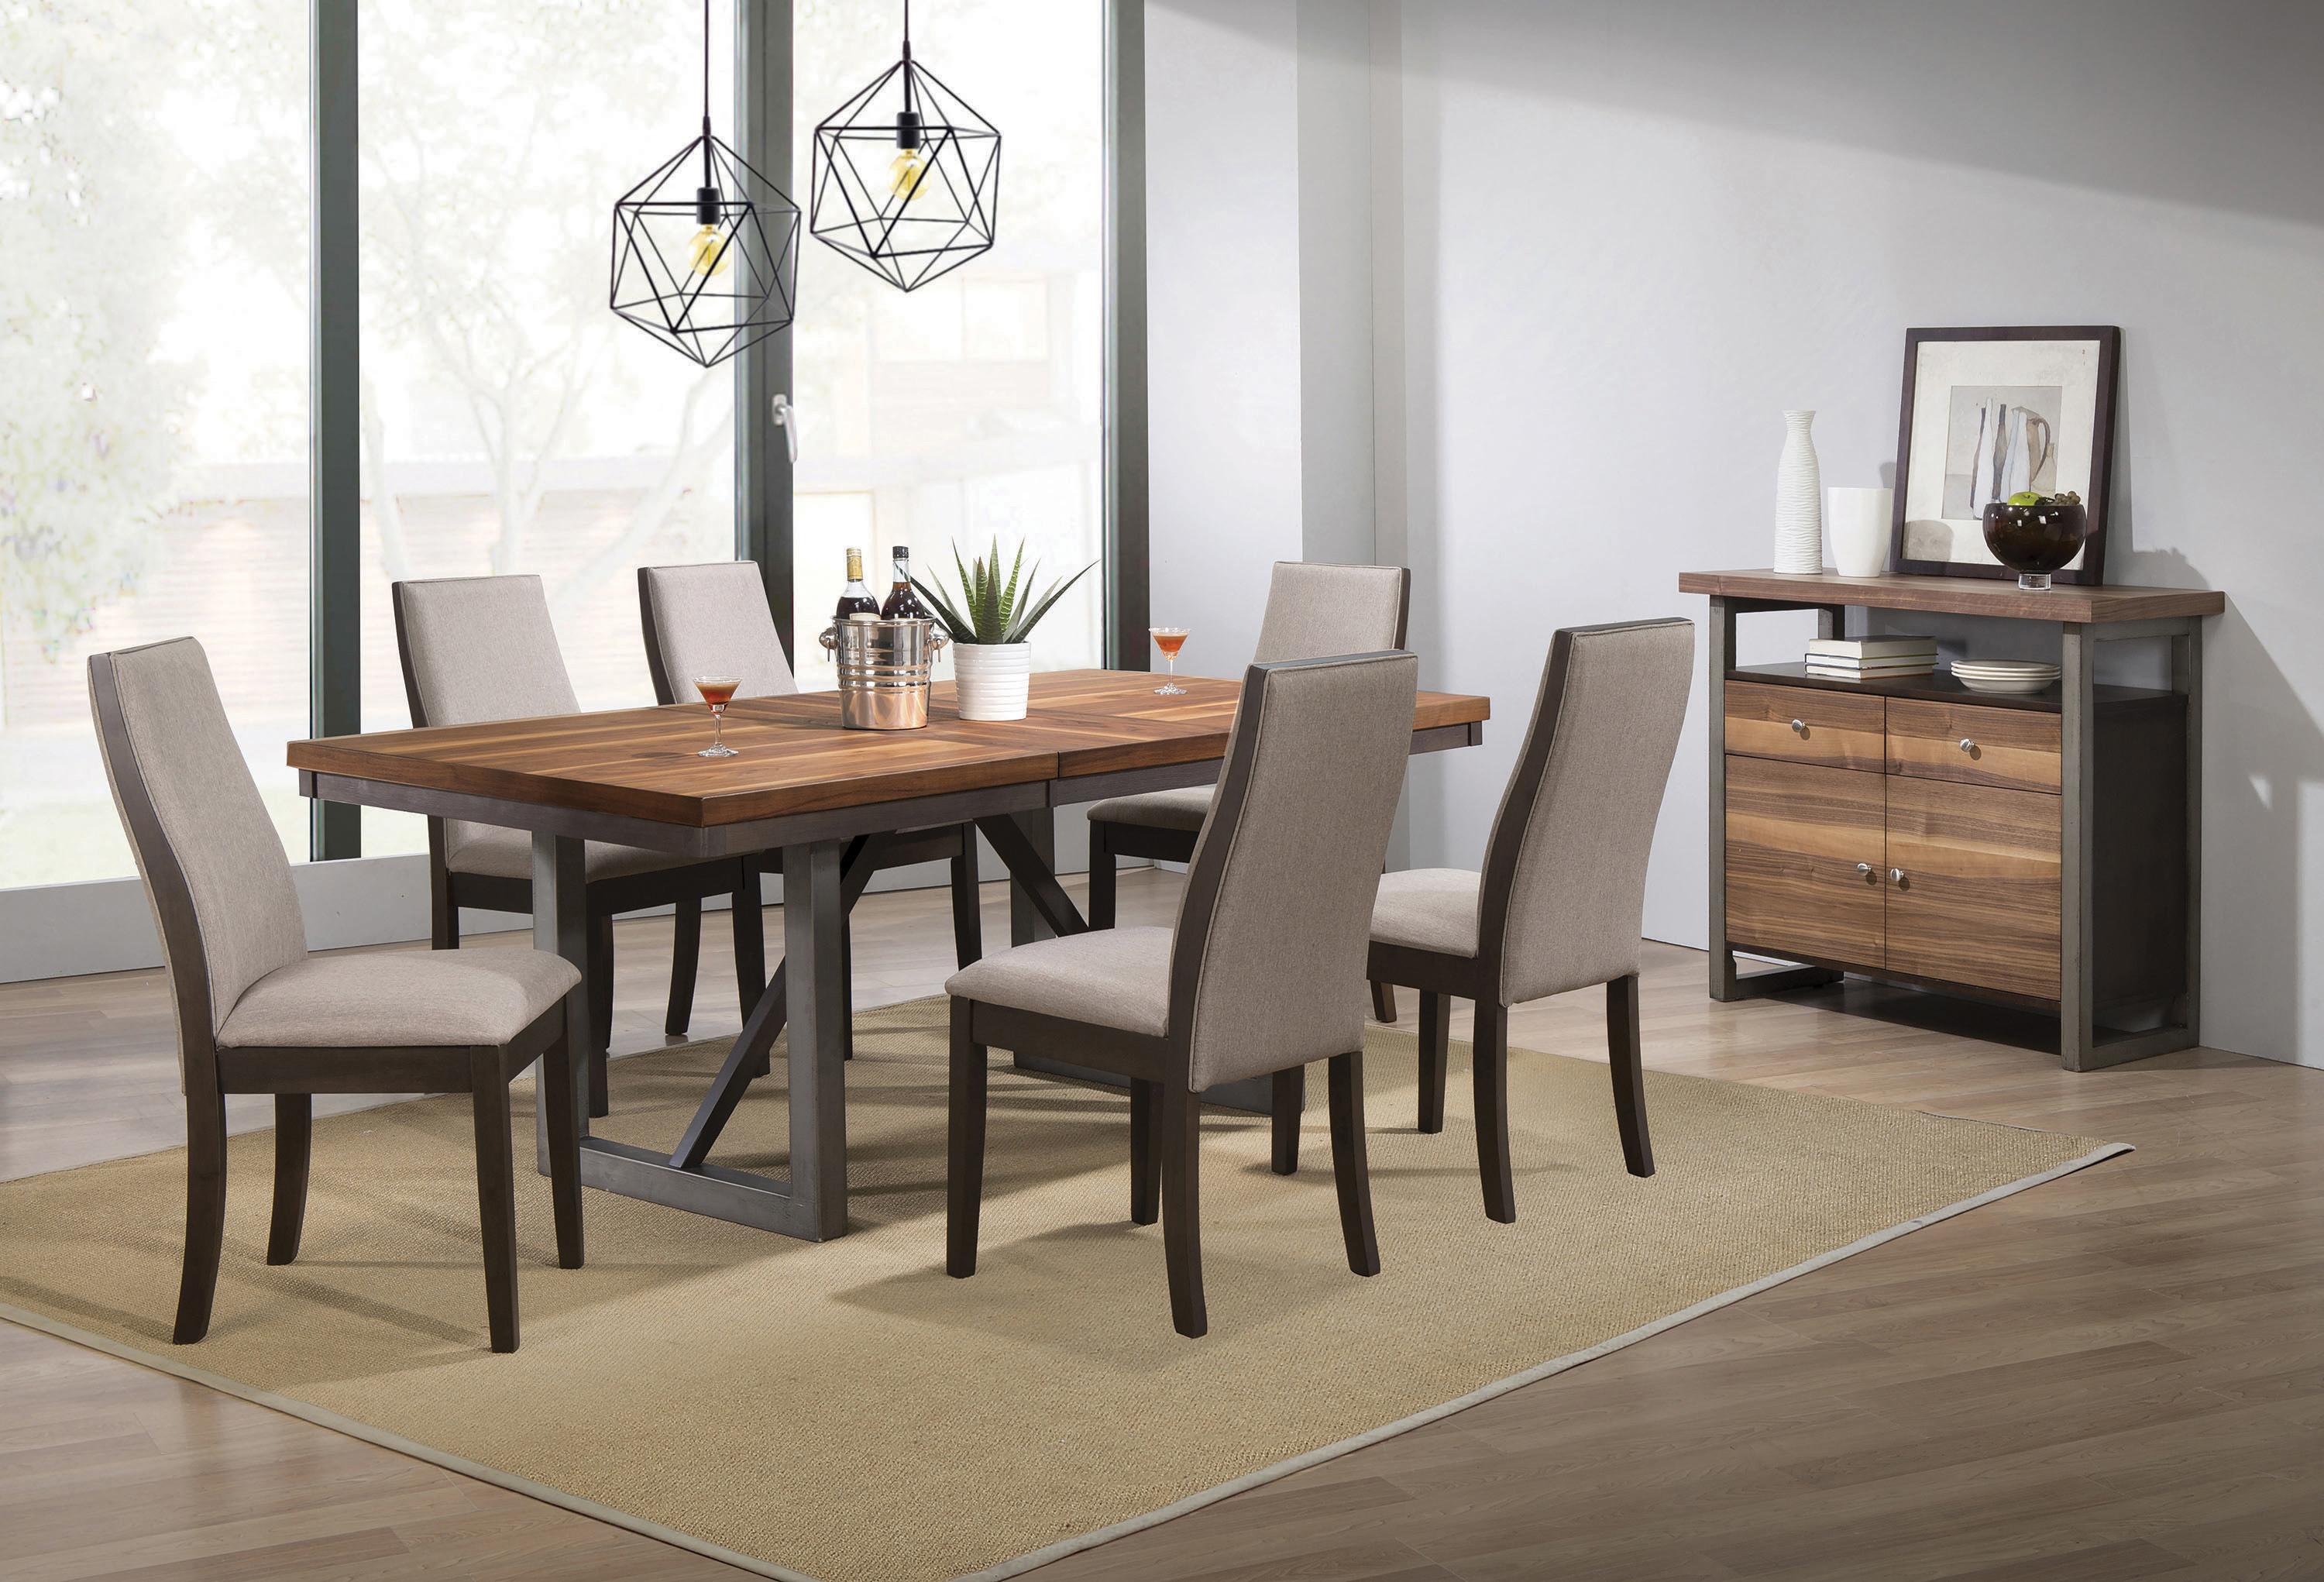 Transitional Dining Room Set 106581-S5G Spring Creek 106581-S5G in Gray Fabric